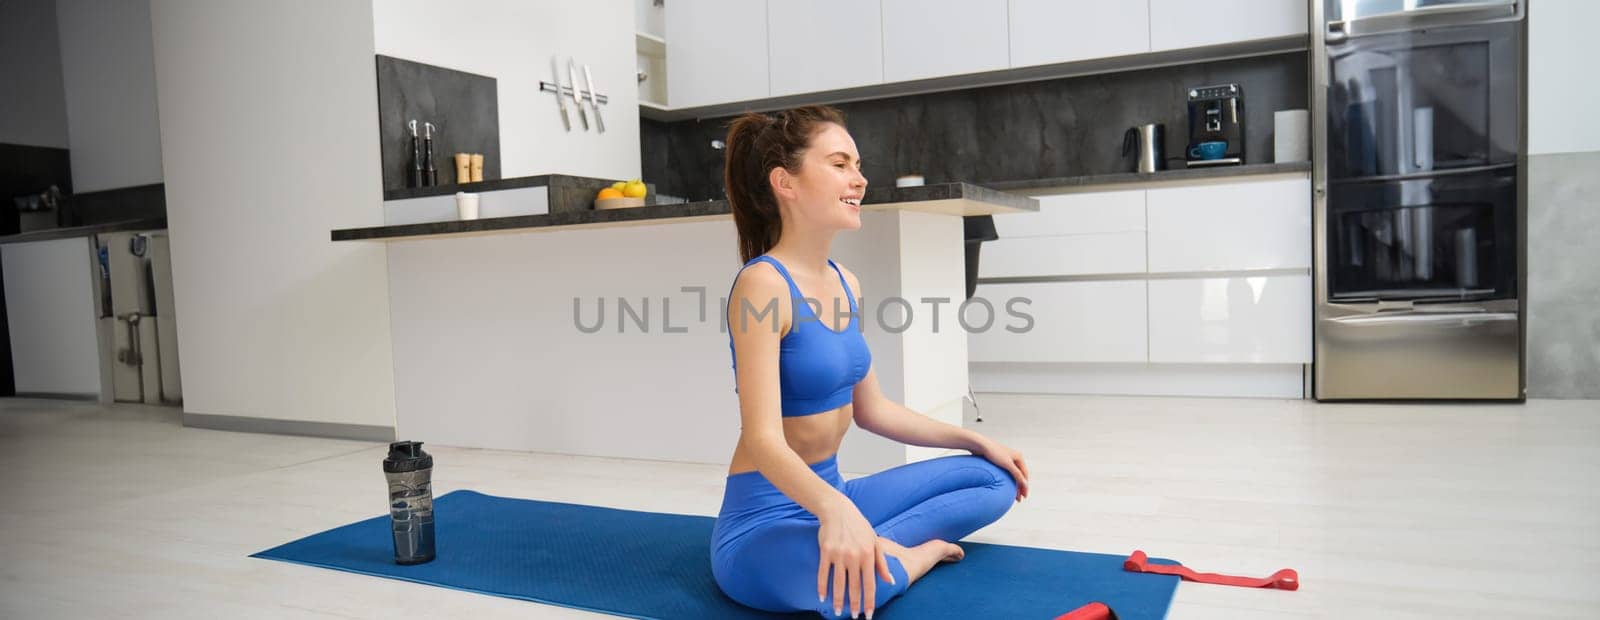 Portrait of woman concentrating on yoga breathing practice, does exercises, sits on rubber mat and meditating, workout at home.